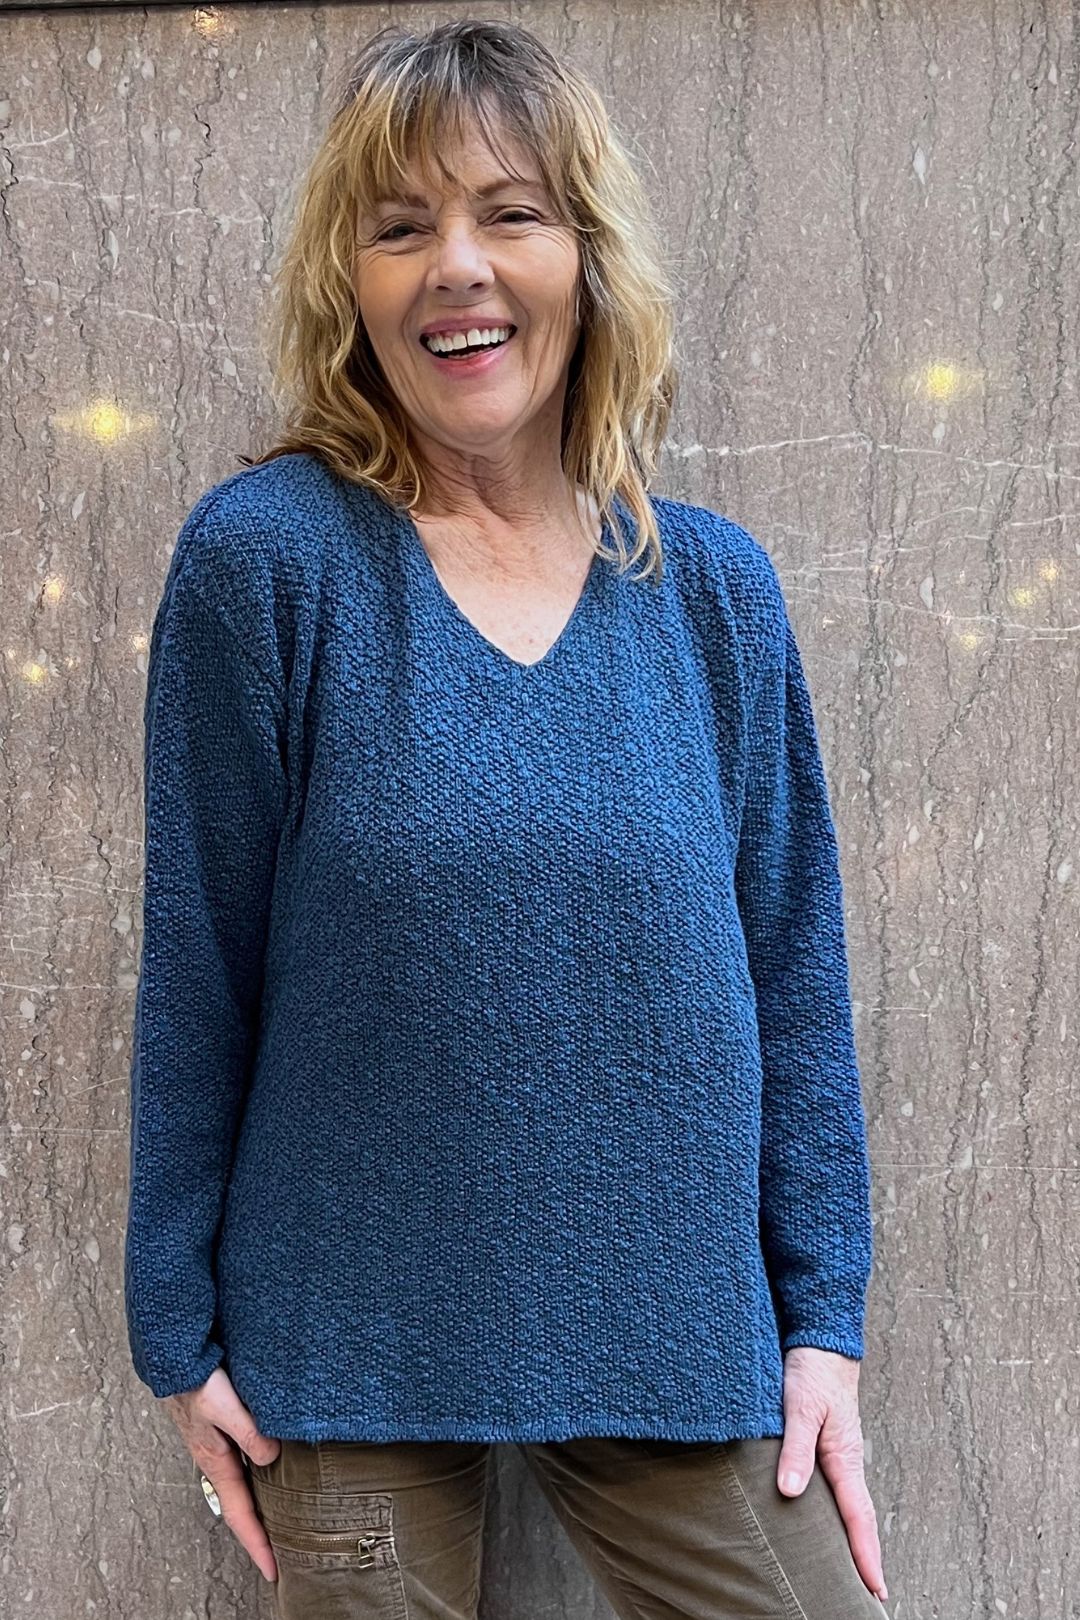 The Ultimate Cotton Sweater - Seed Stitch V Neck